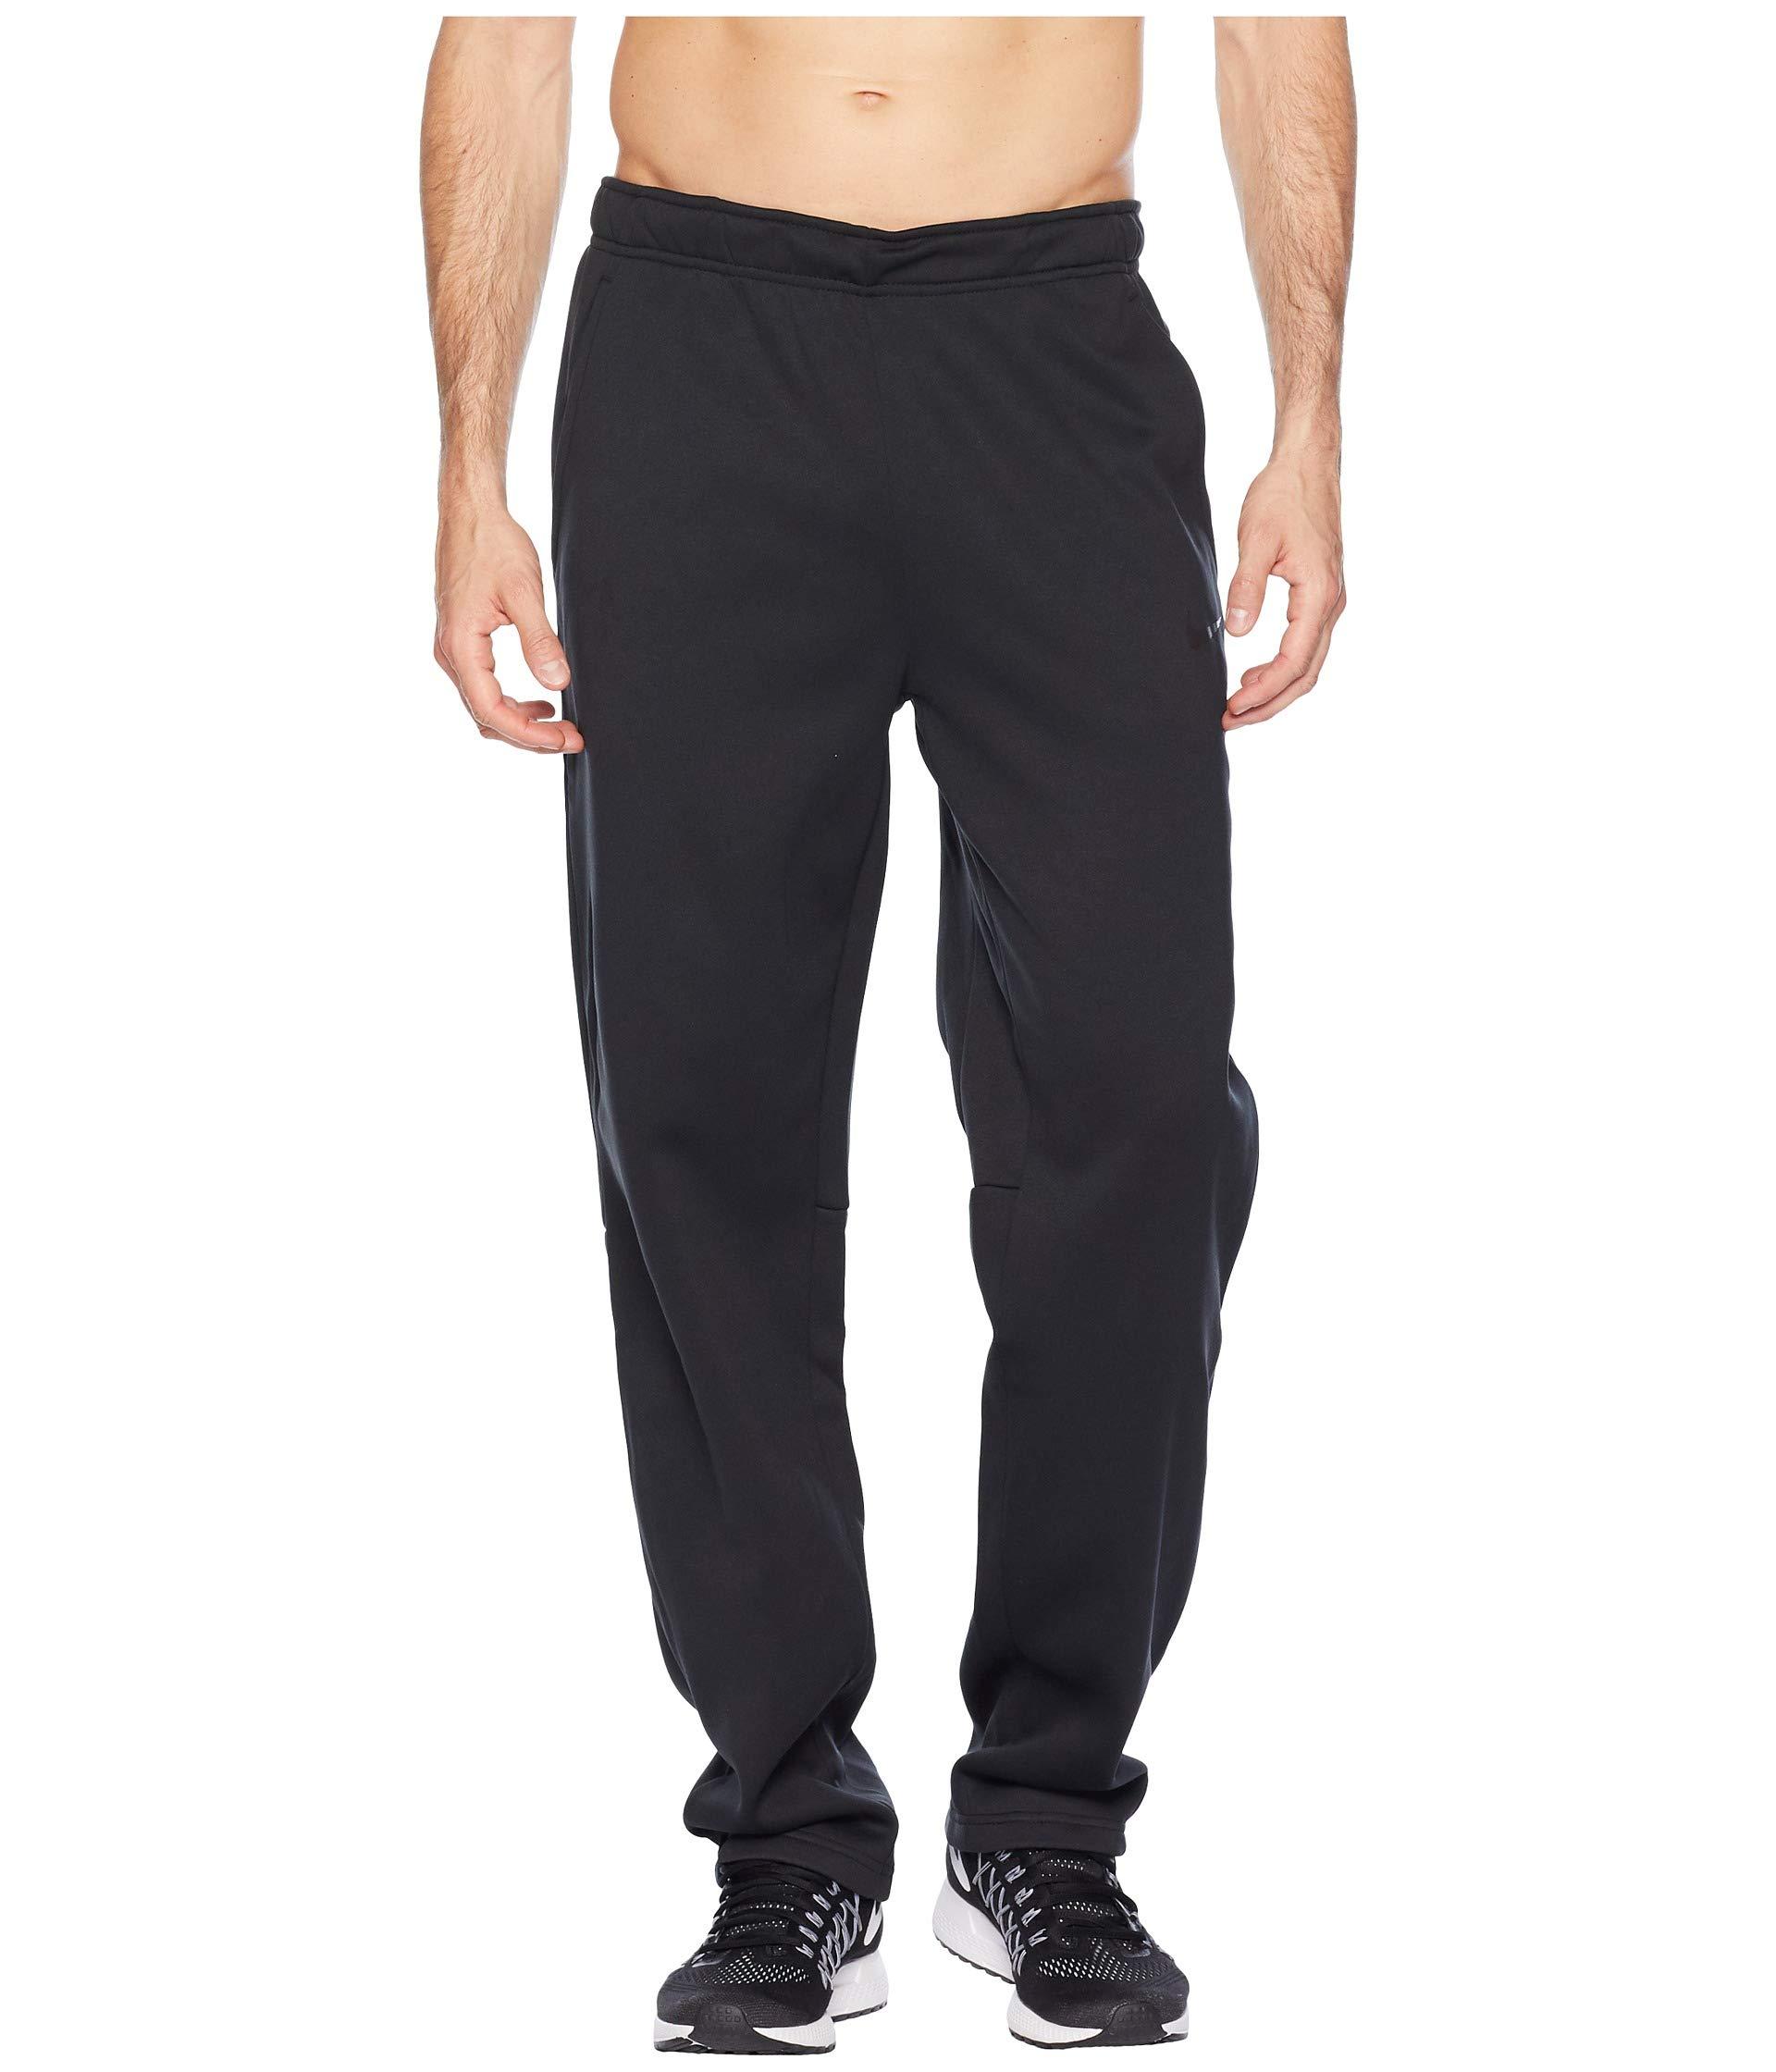 Nike Synthetic Dri-fit Therma Pants in Black for Men - Lyst